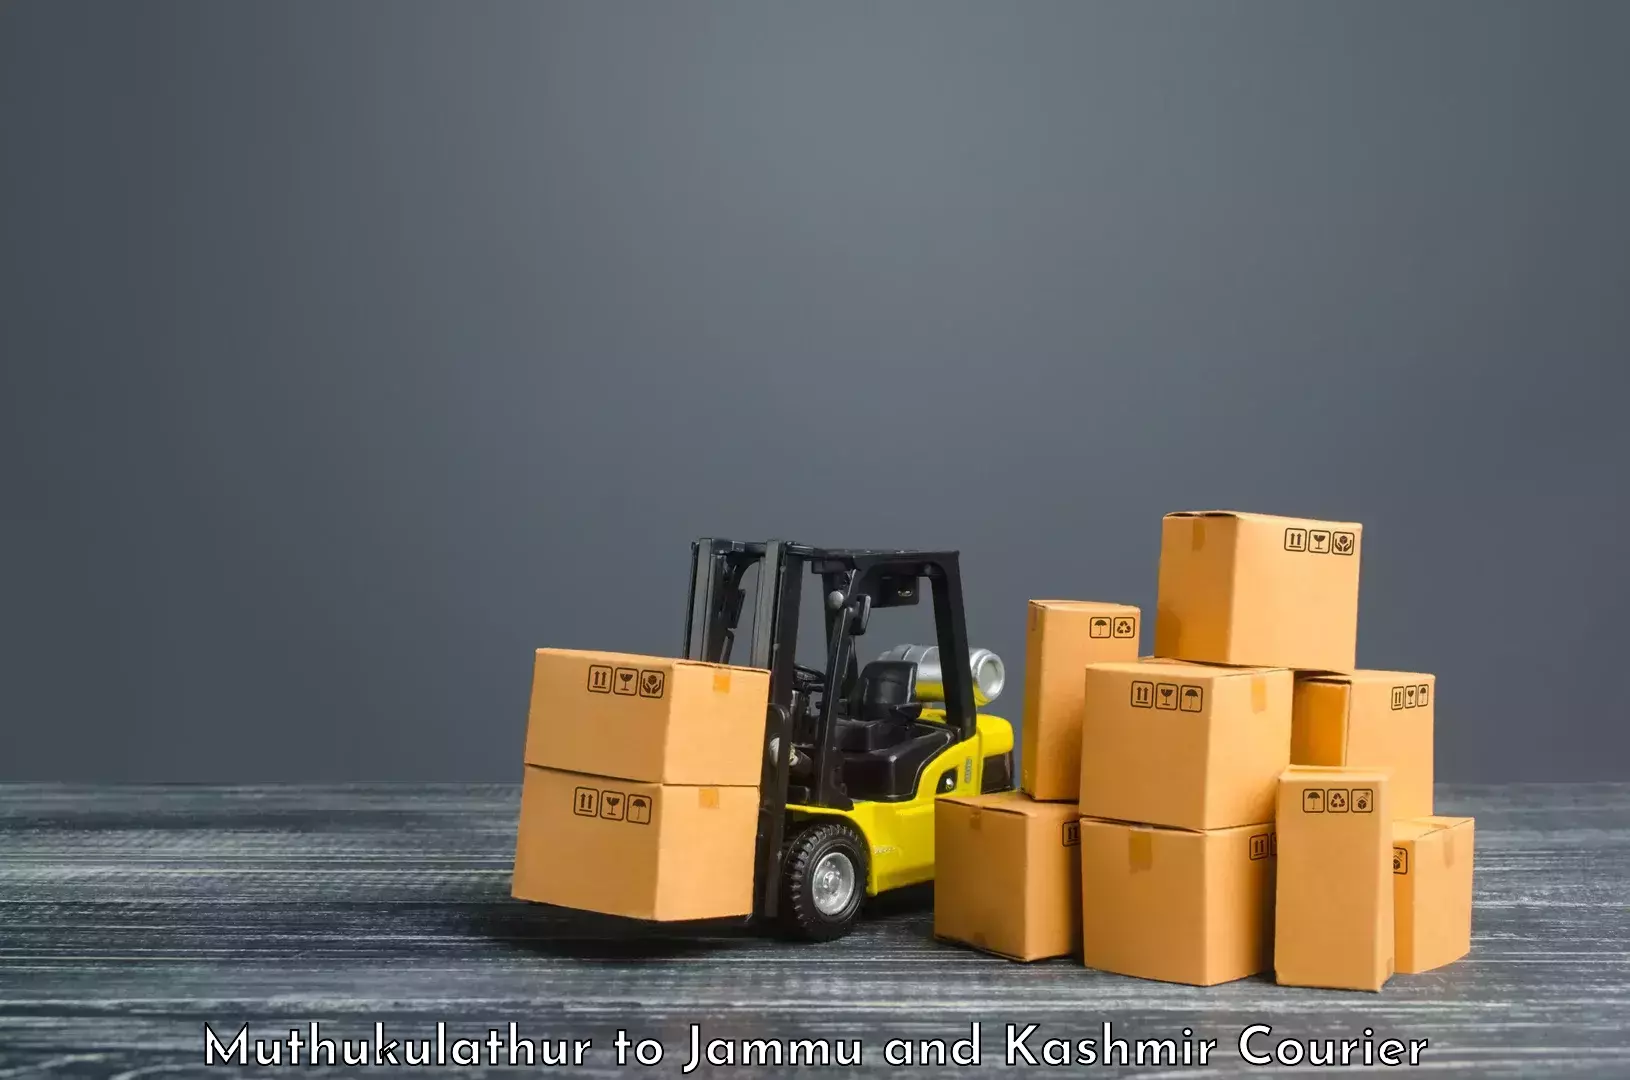 Customer-oriented courier services in Muthukulathur to Kupwara